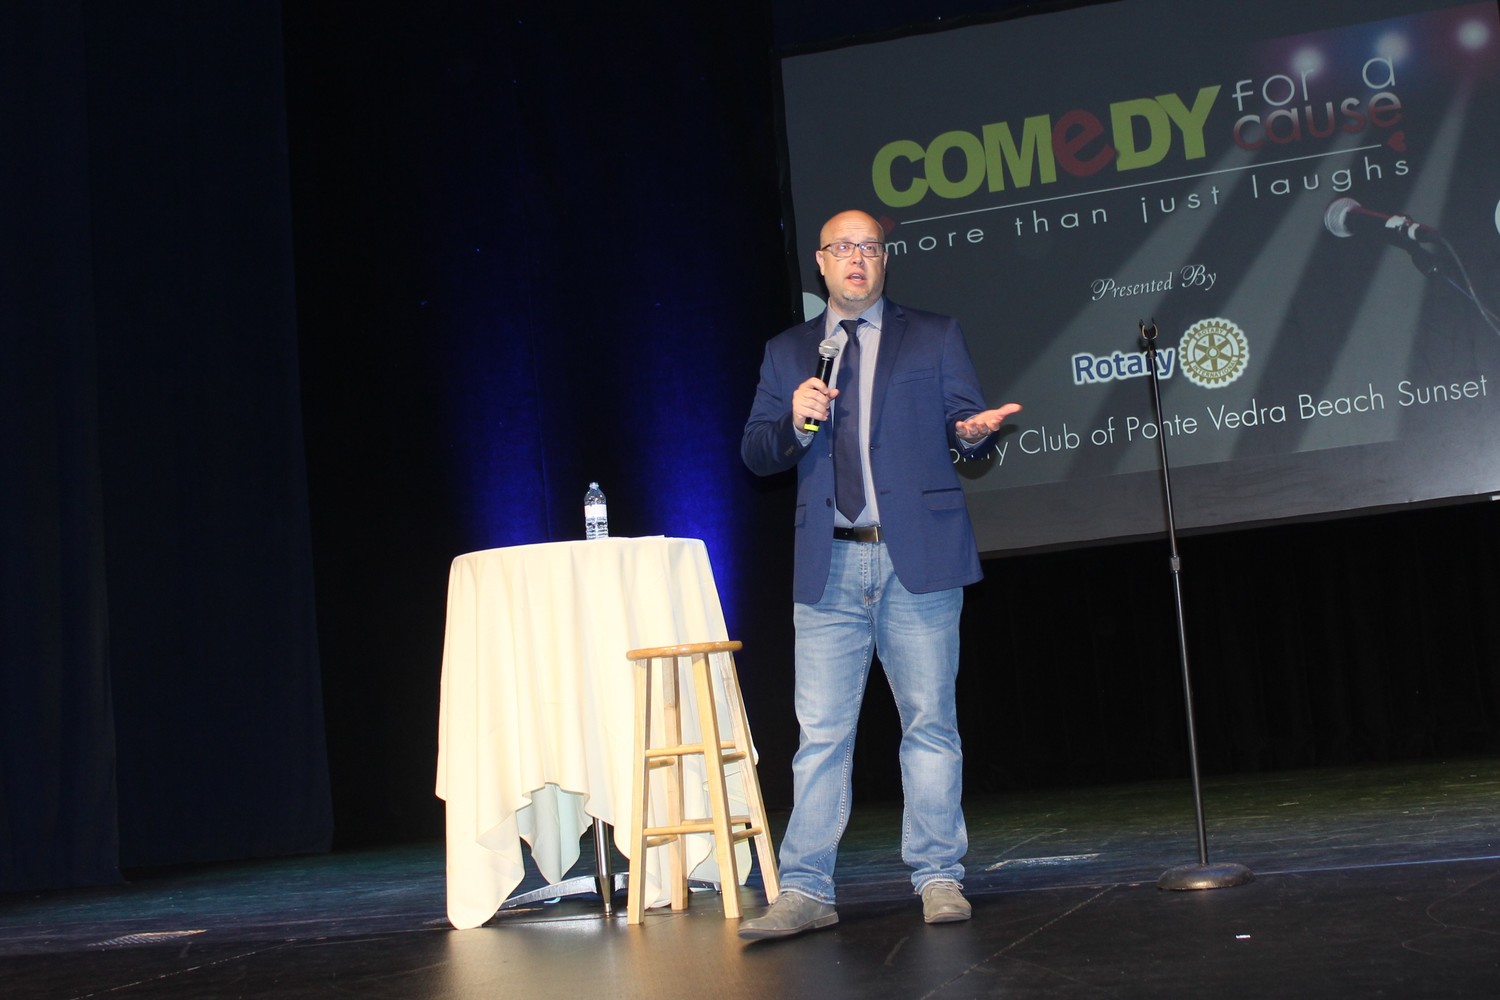 Comedian Danny Johnson entertains the crowd at the Rotary Club of Ponte Vedra Beach Sunset’s Comedy for a Cause fundraiser on April 21 at UNF’s Robinson Theater.